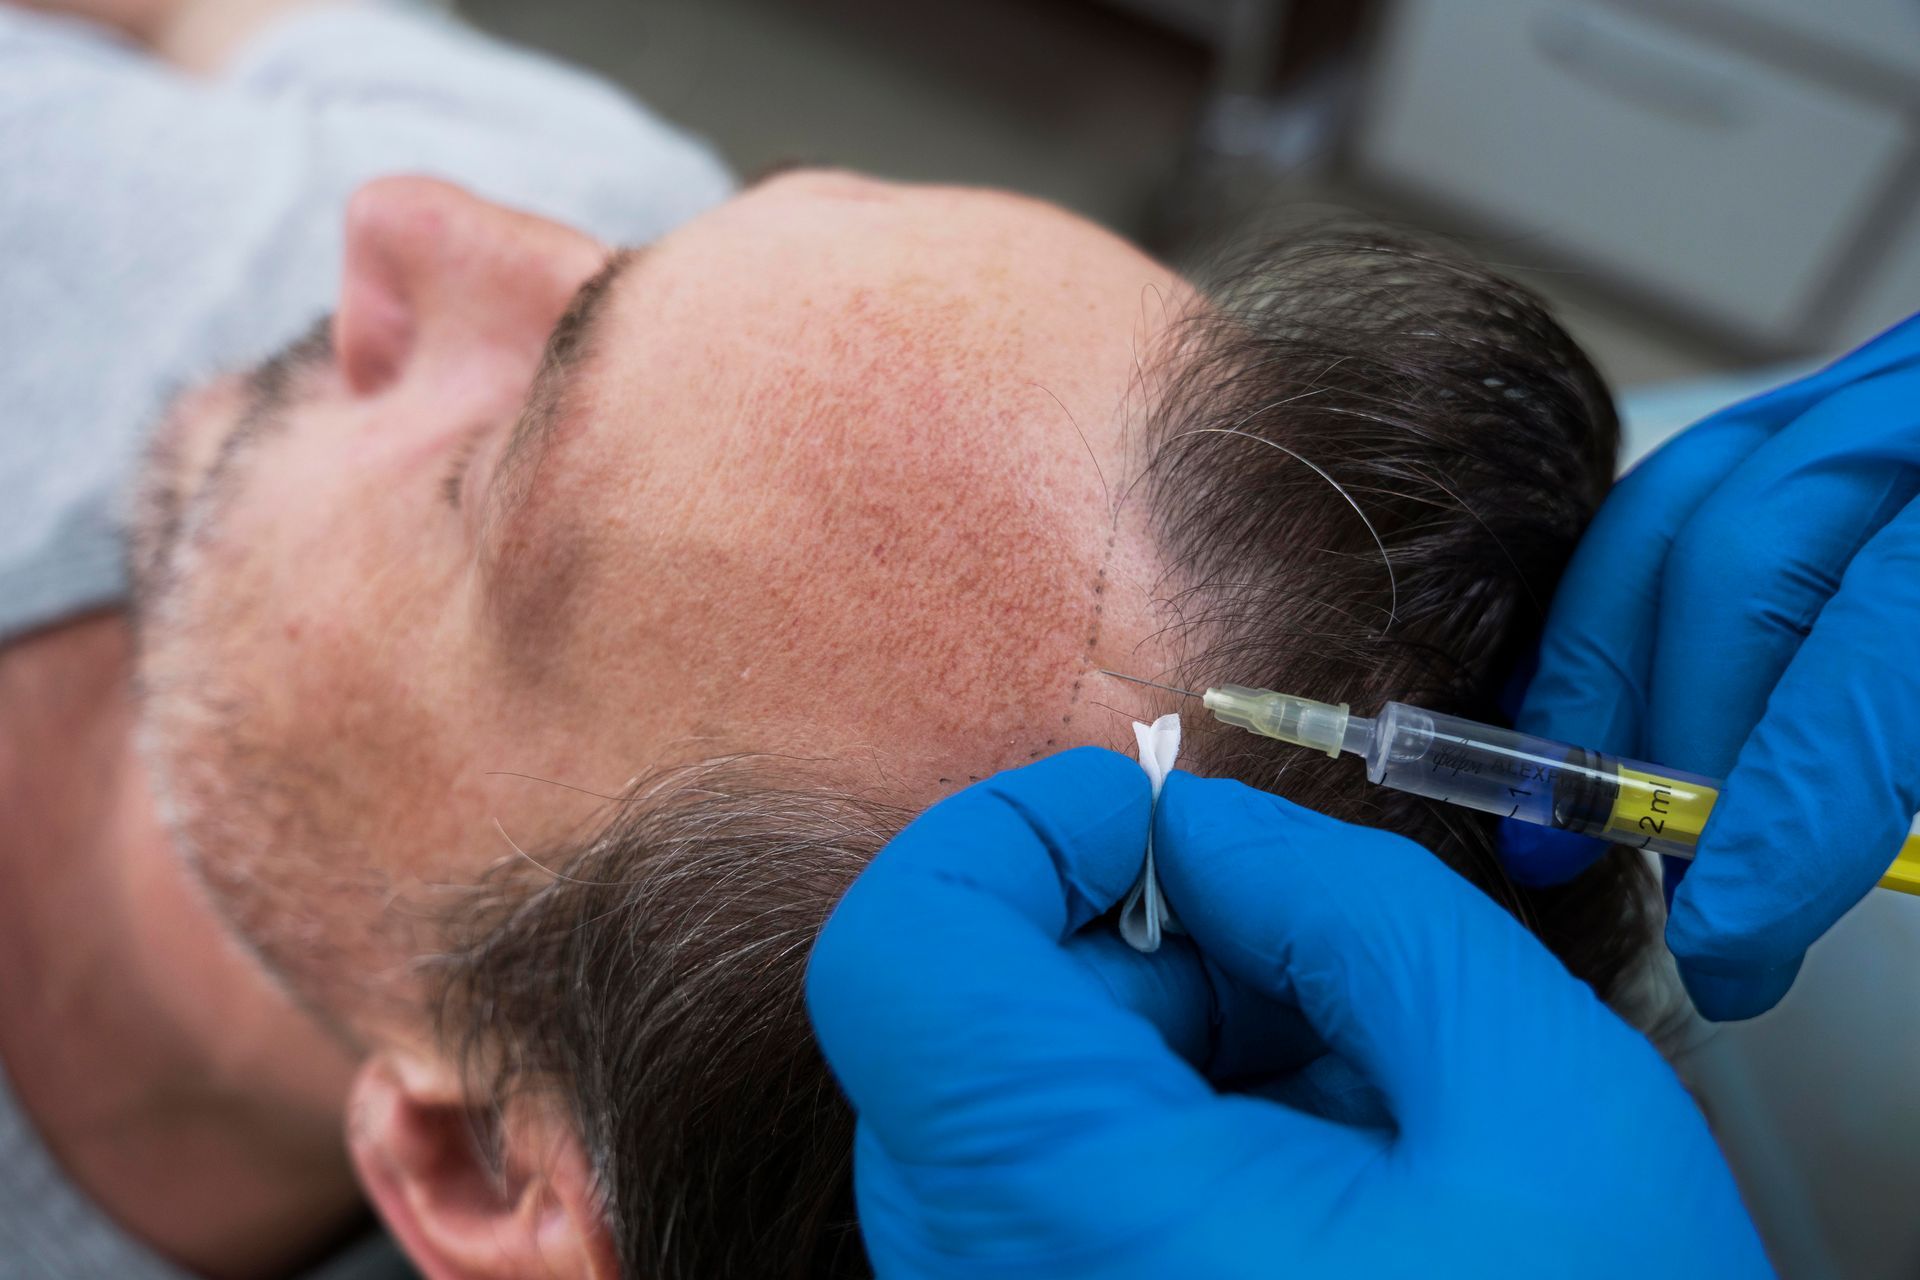 a man is getting an injection in his forehead with a syringe that says 0.5 ml